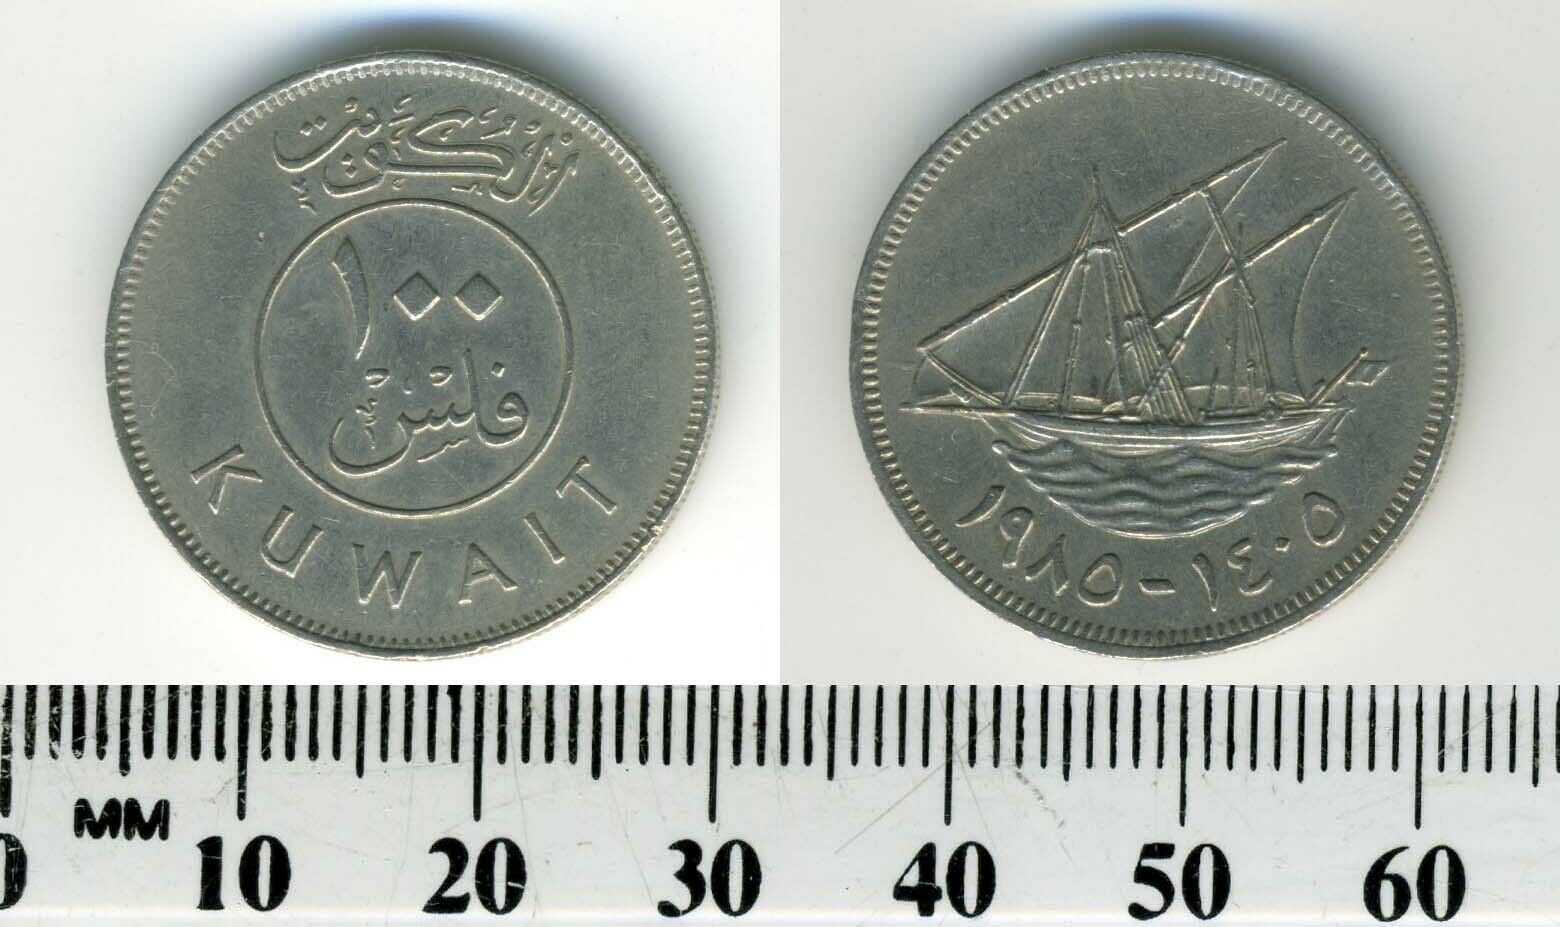 Kuwait 1985 (1405) - 100 Fils Copper-nickel Coin - Dhow With Sails